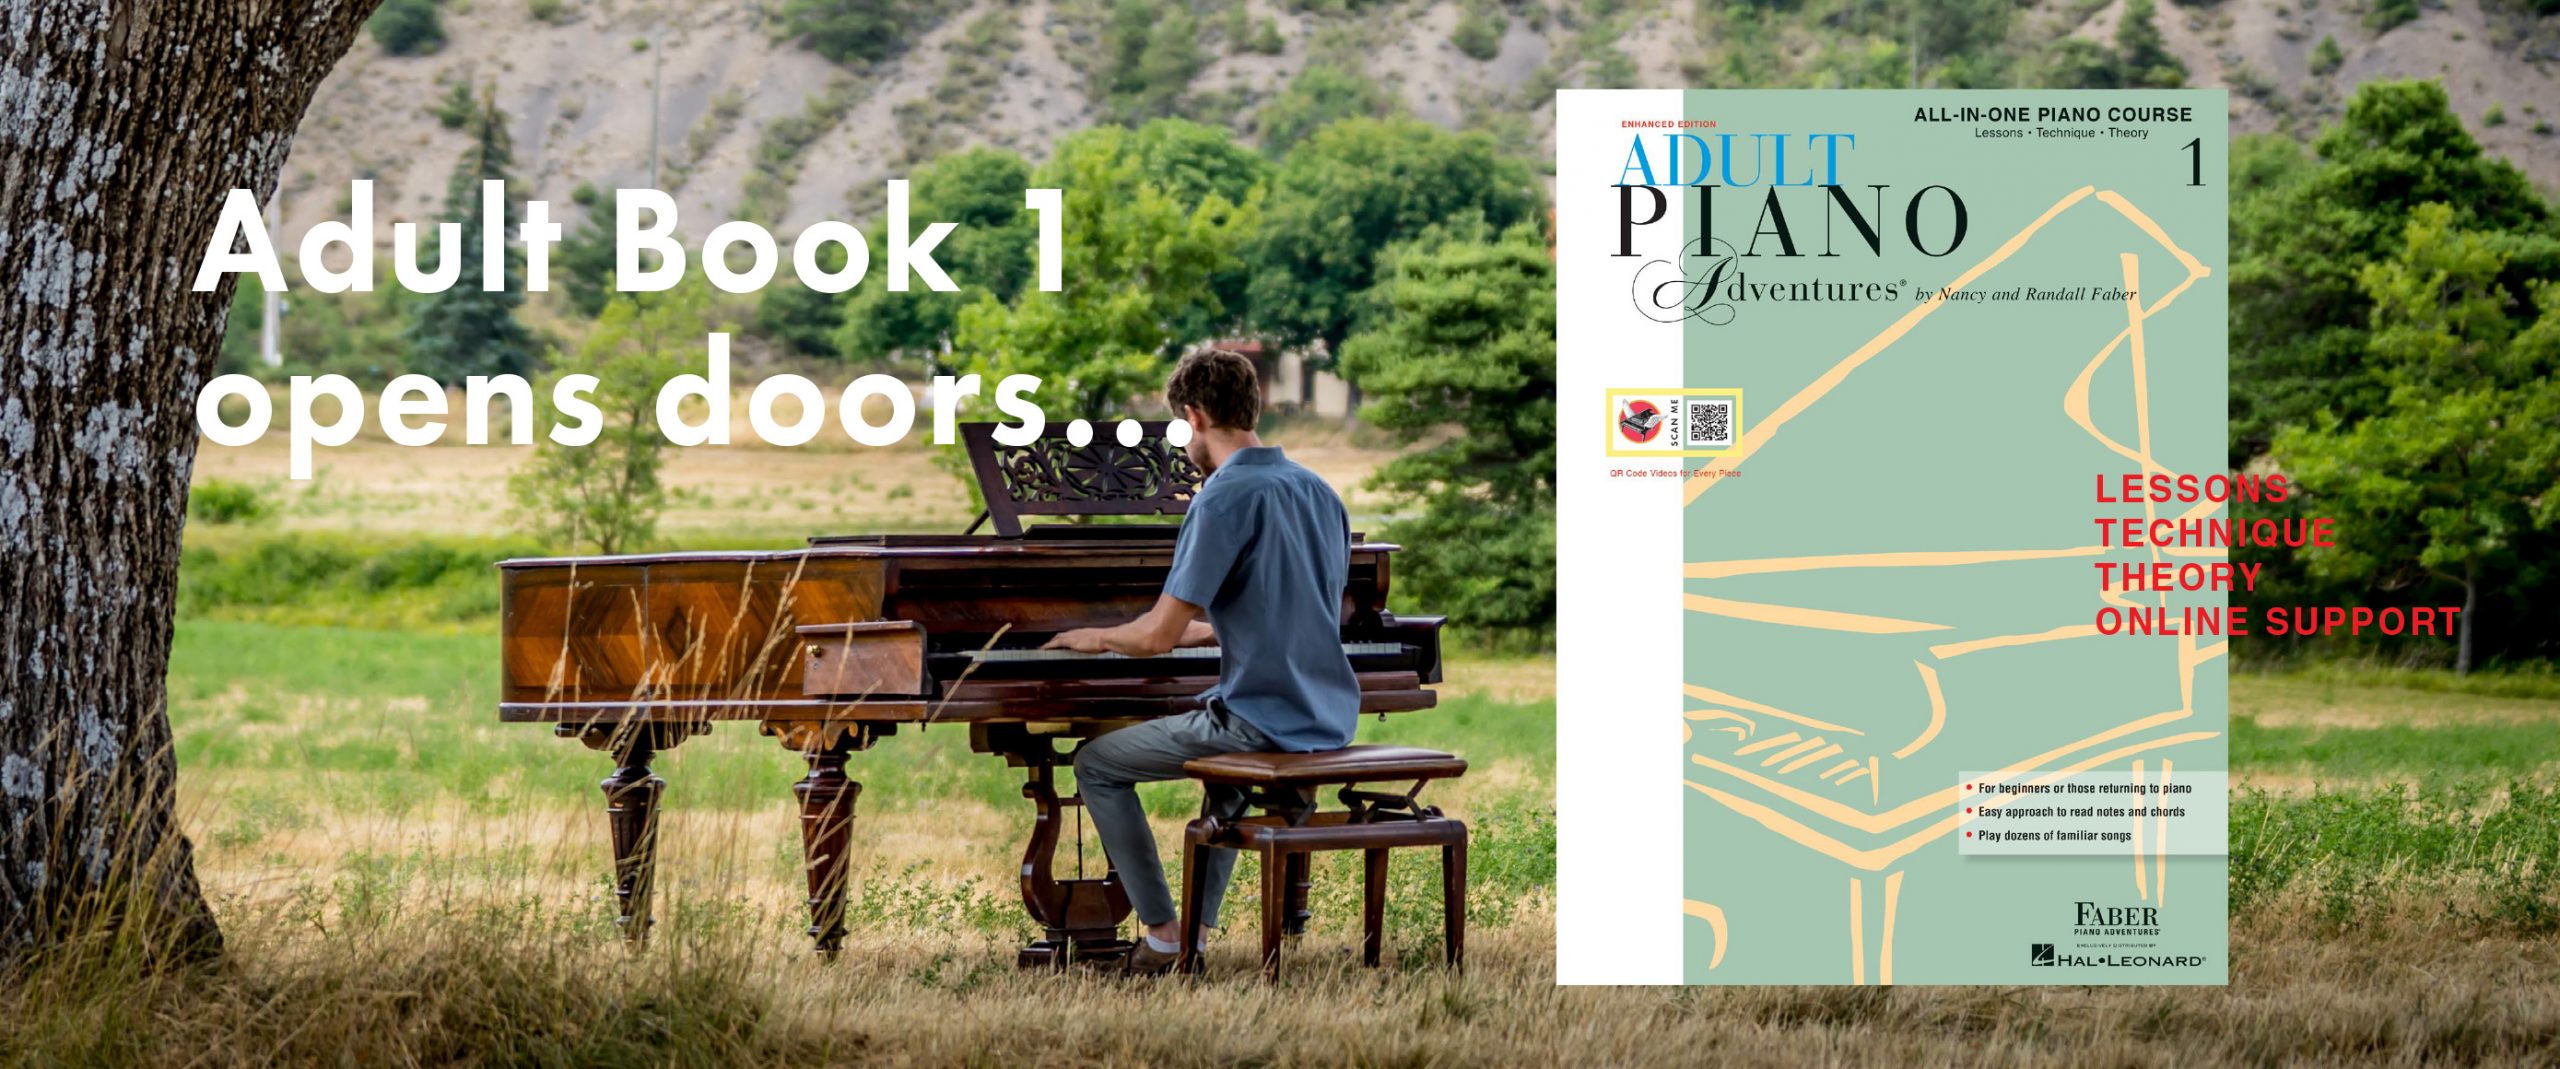 Adult Piano Adventures All-in-One Course Book 1 - Faber Piano Adventures